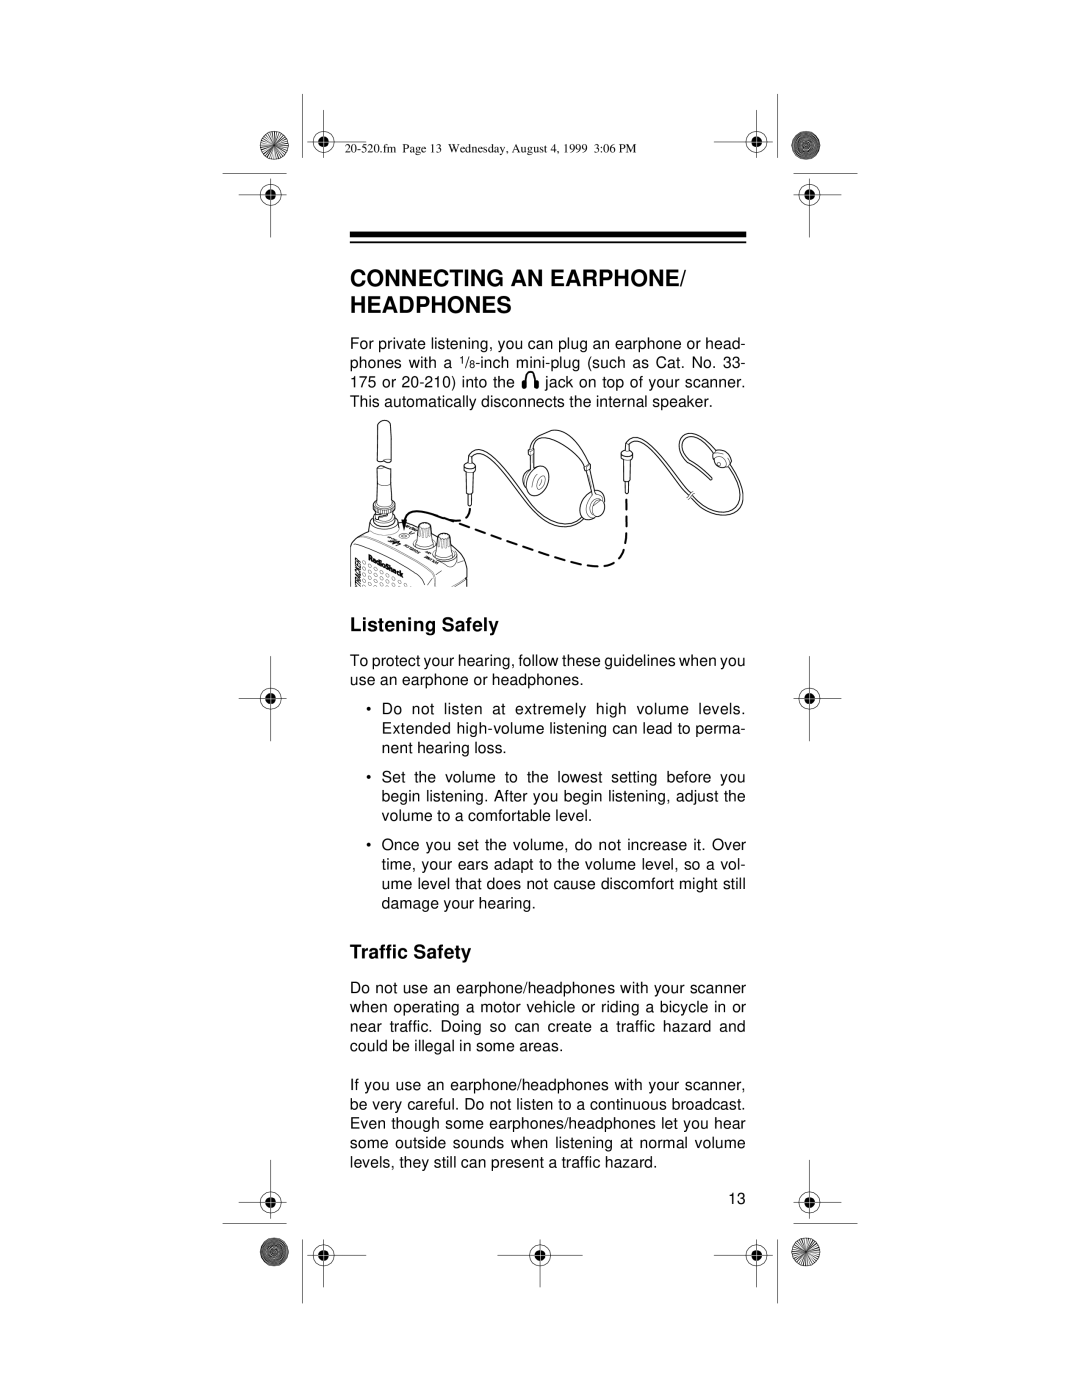 Radio Shack PRO-90 owner manual Connecting An Earphone/ Headphones, Listening Safely, Traffic Safety 